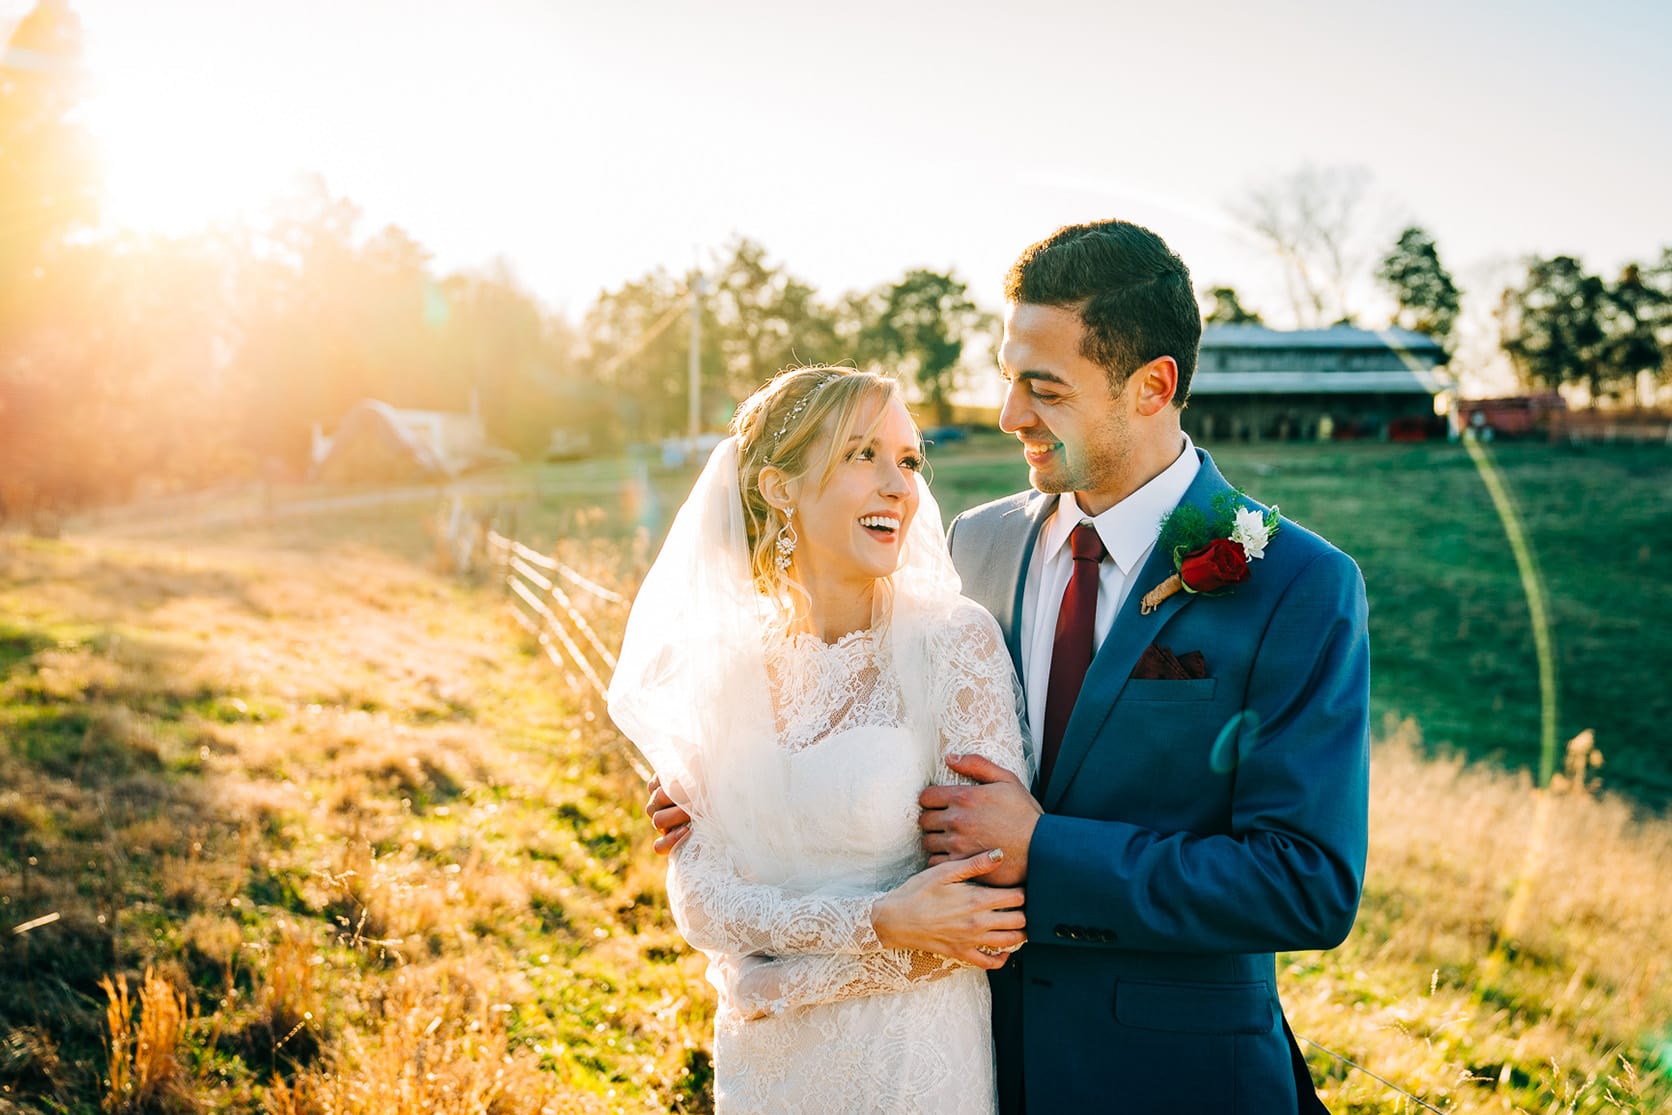 Bride and Groom at Sunset on Family Farm